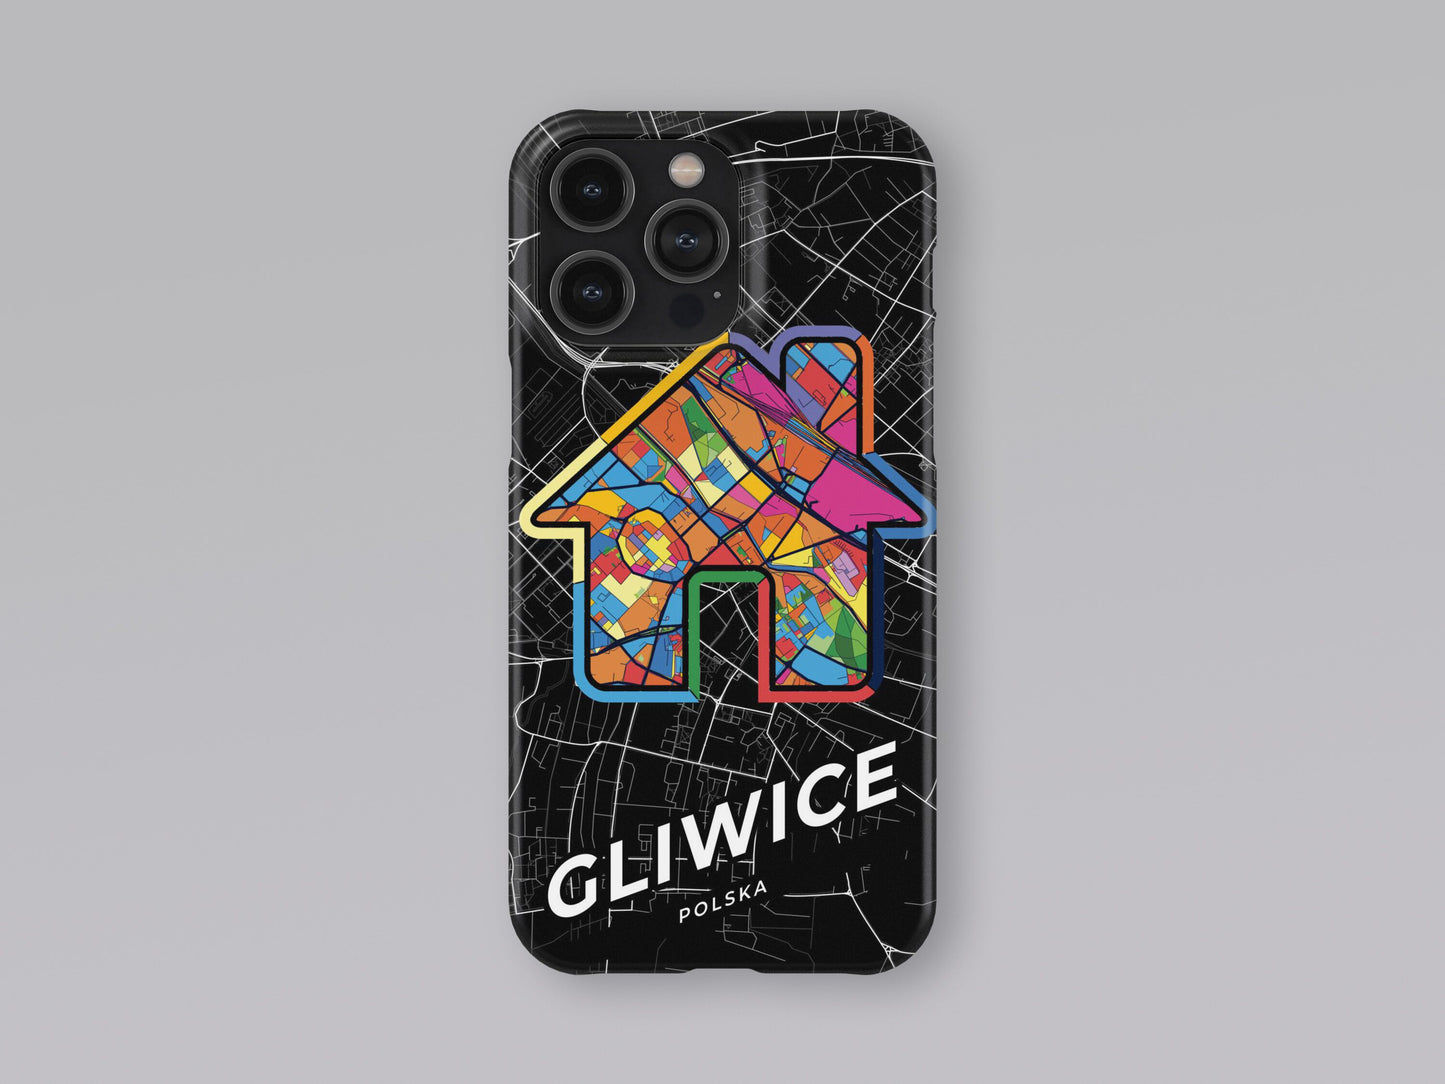 Gliwice Poland slim phone case with colorful icon. Birthday, wedding or housewarming gift. Couple match cases. 3